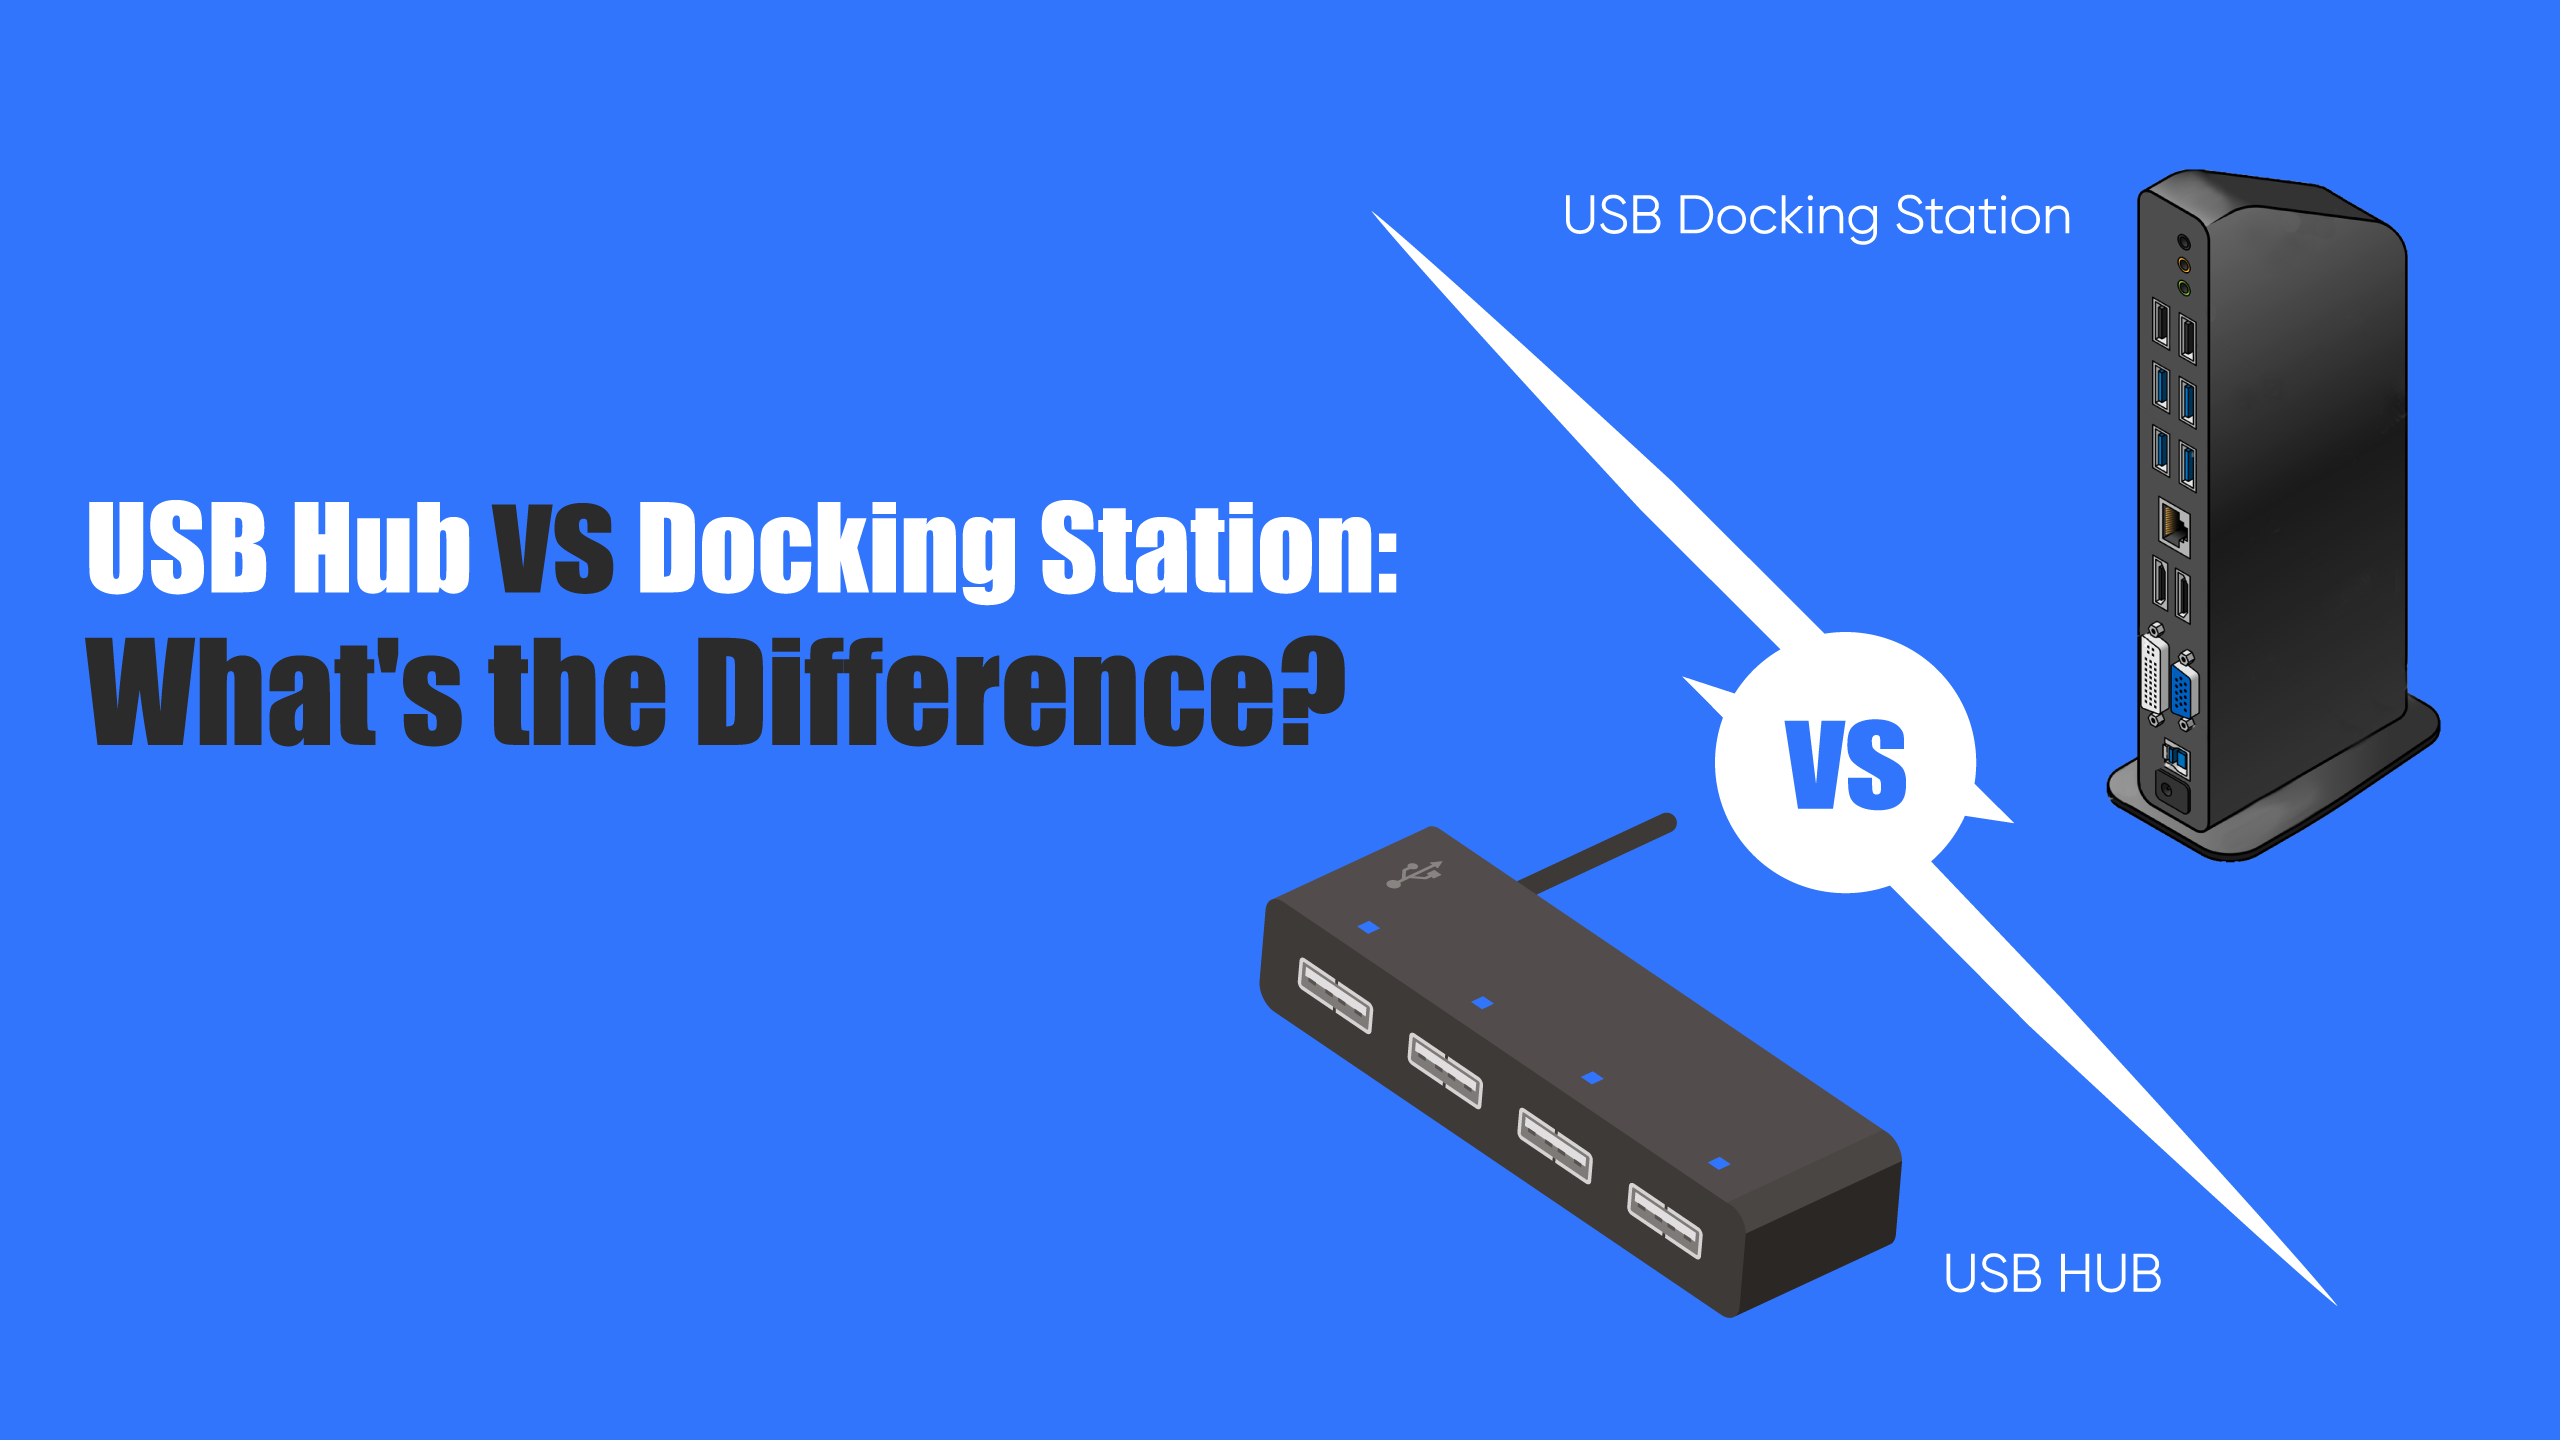 Differences between USB Hubs and Docking stations